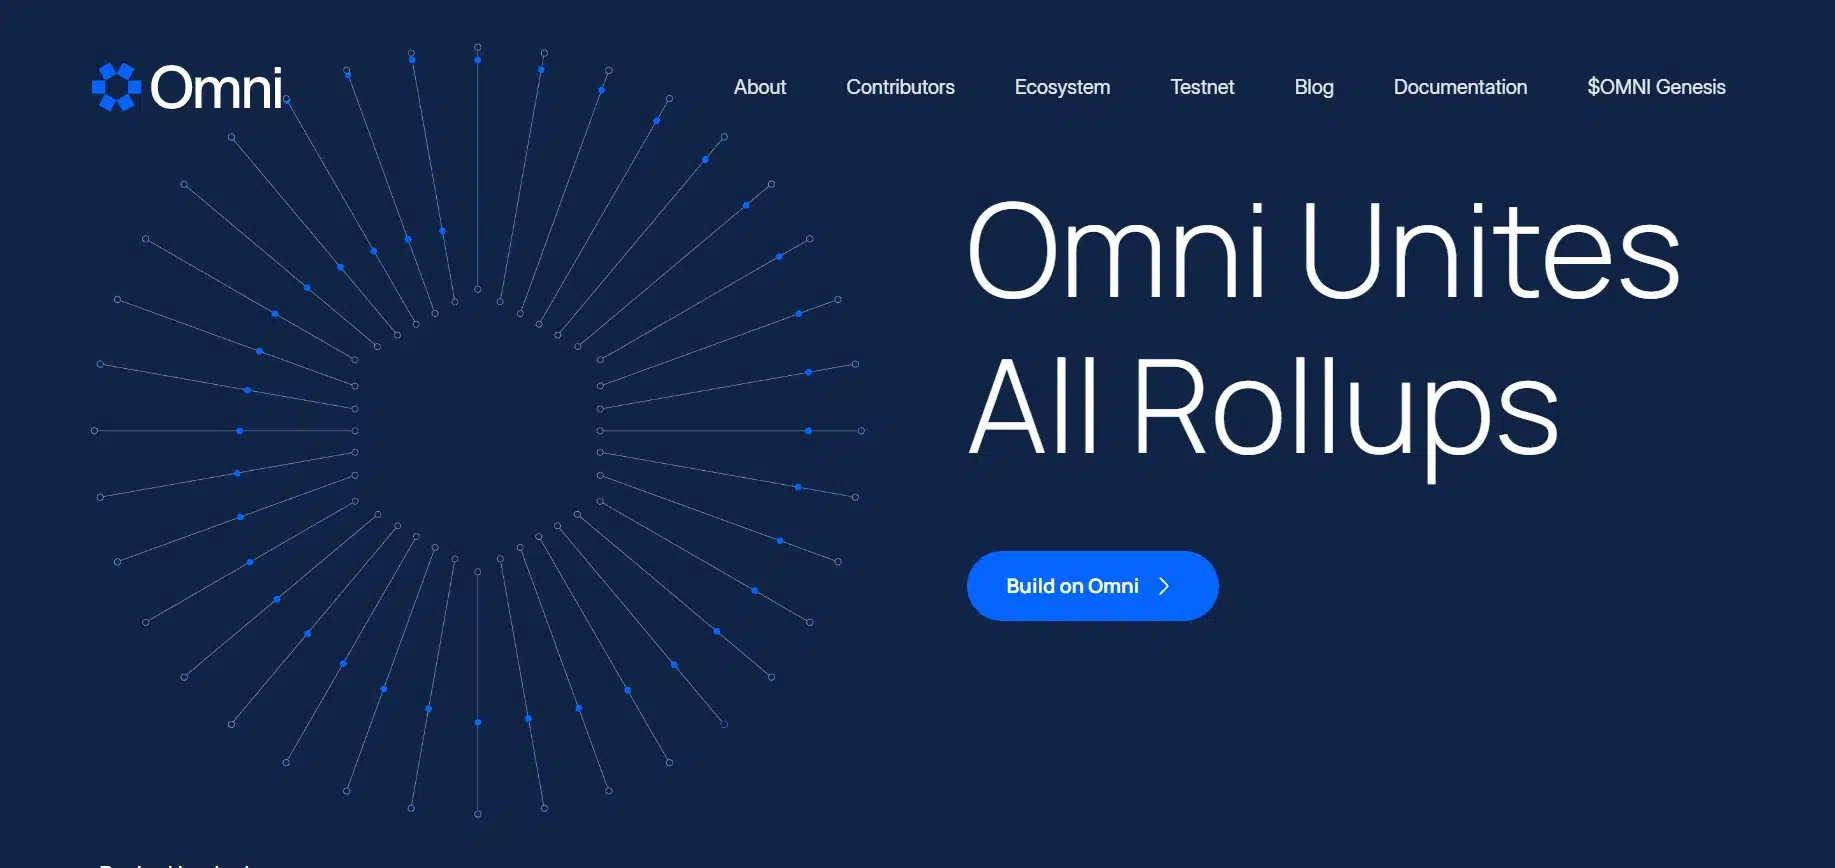 What Is Omni Network